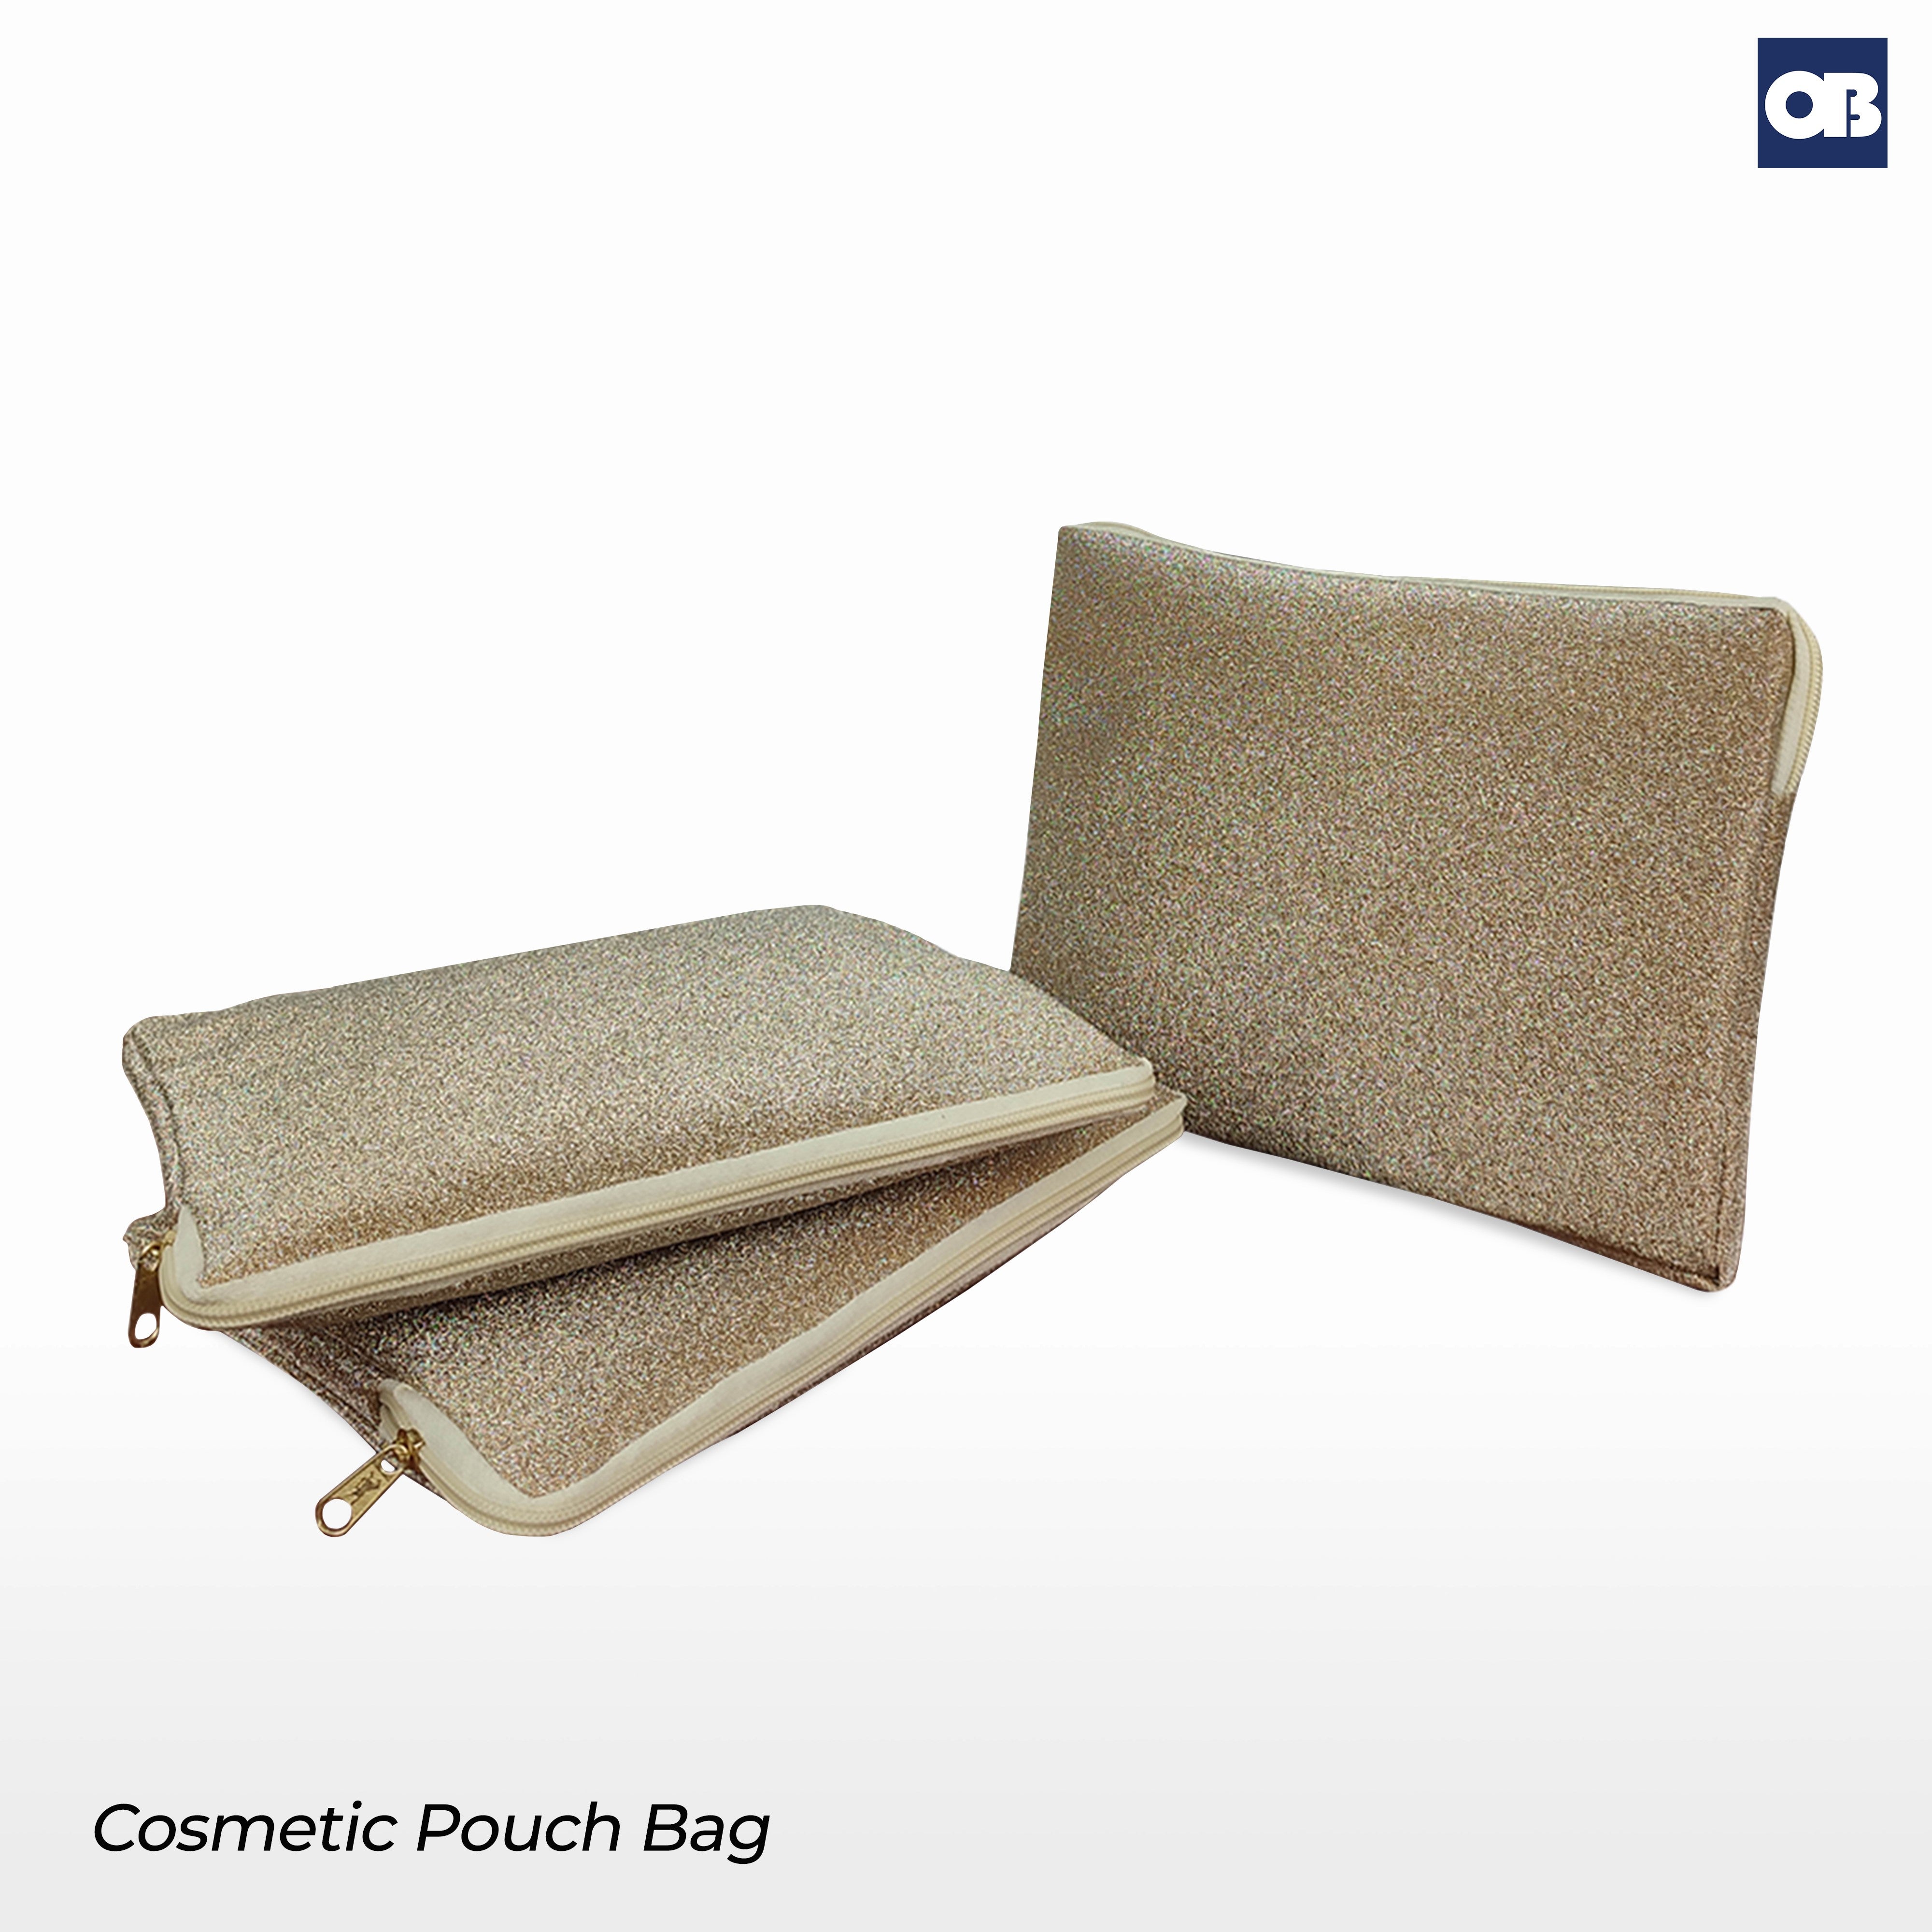 OB Cosmetic Pouch Bag